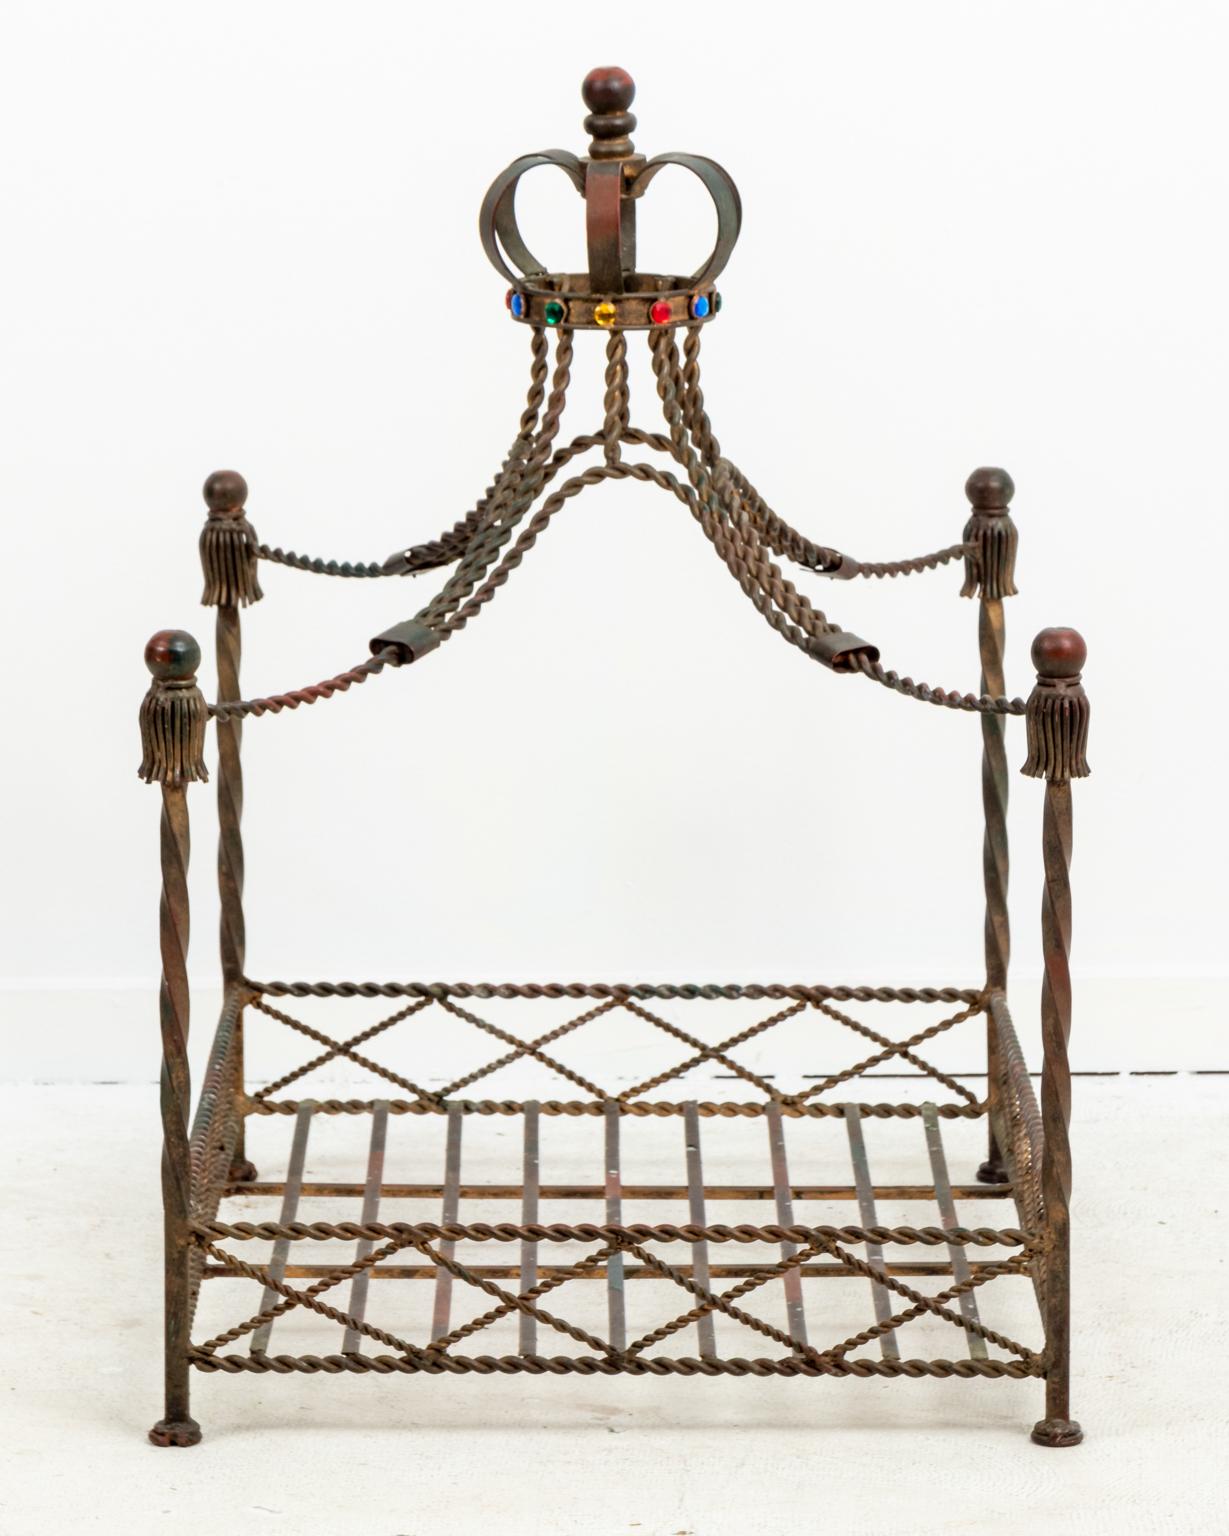 Iron dog bed with jeweled crown on top of the Iron canopy in a worn, gilt finish, circa 1980s. Made in Italy. Please note of wear consistent with age including patina.